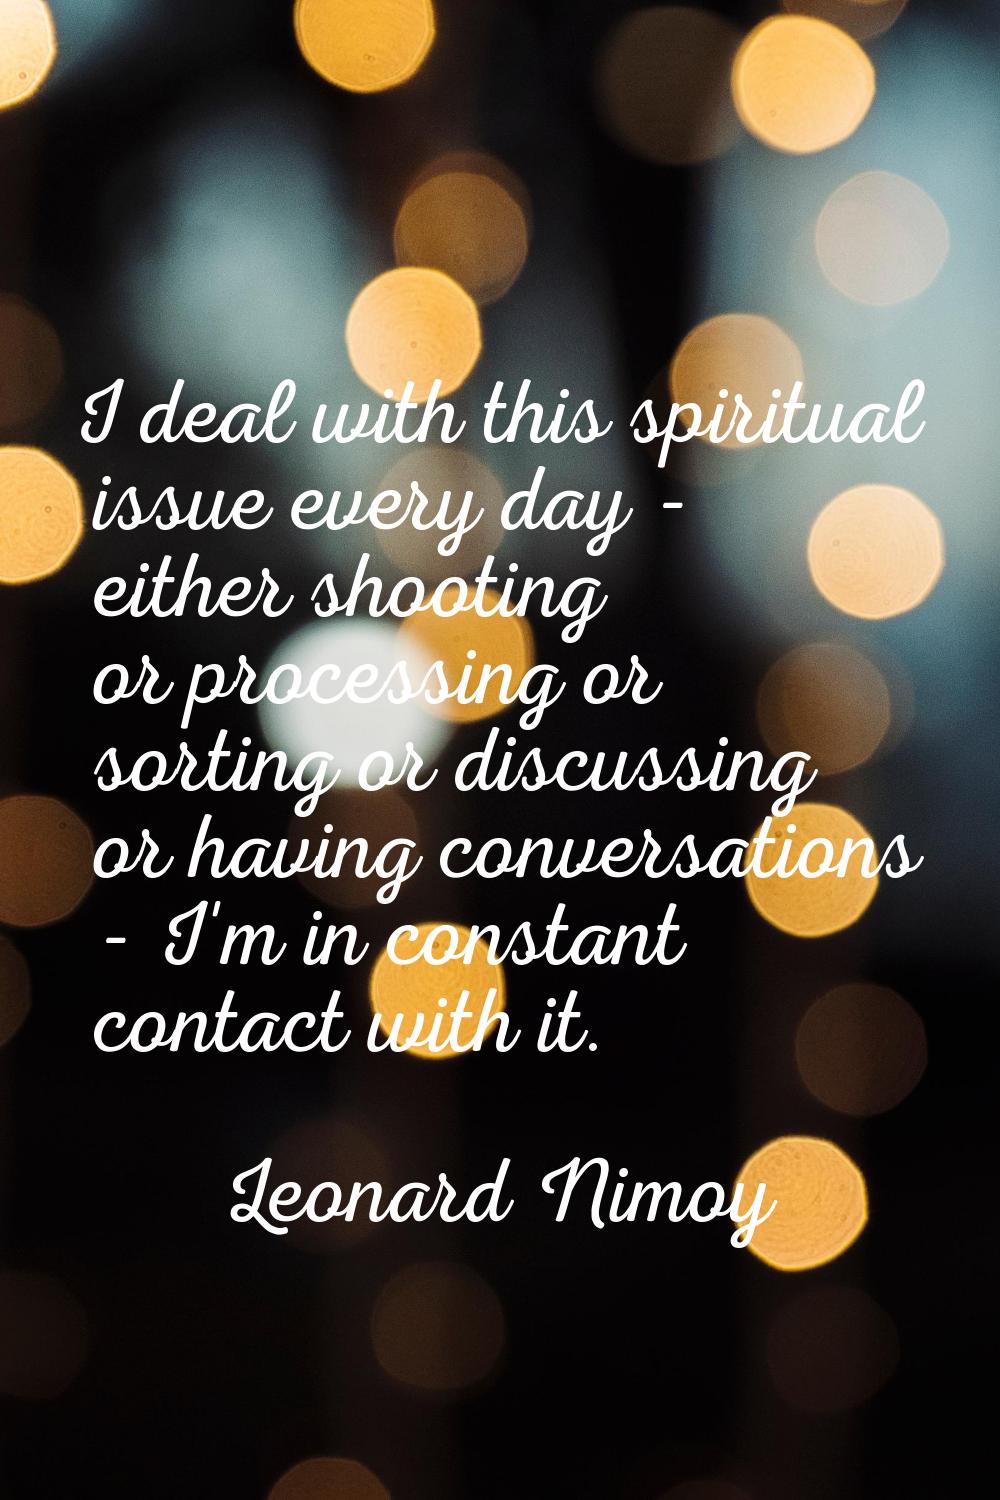 I deal with this spiritual issue every day - either shooting or processing or sorting or discussing